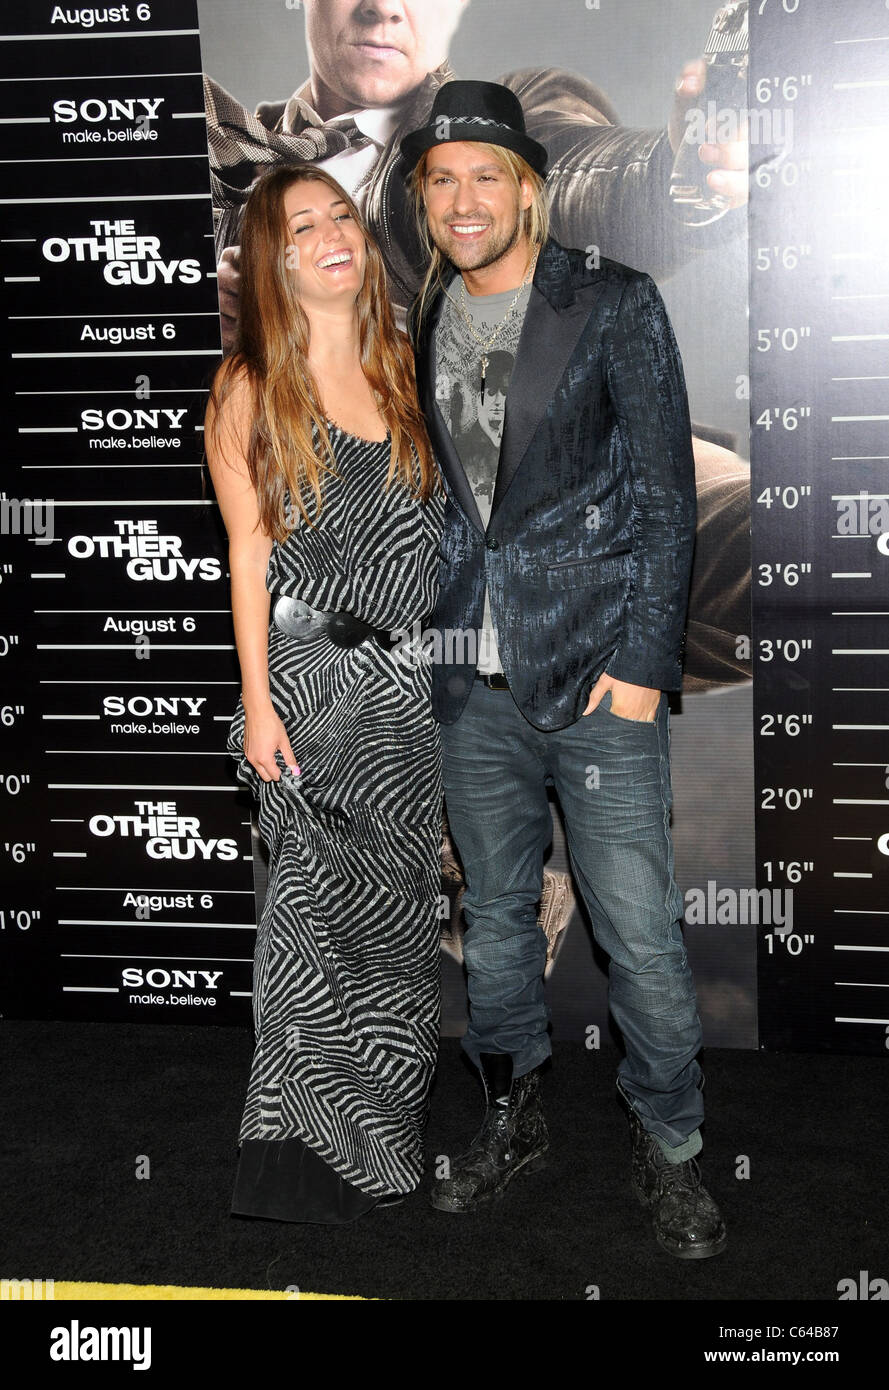 Samantha Swetra, David Garrett at arrivals for THE OTHER GUYS Premiere, The Ziegfeld Theatre, New York, NY August 2, 2010. Photo By: Desiree Navarro/Everett Collection Stock Photo